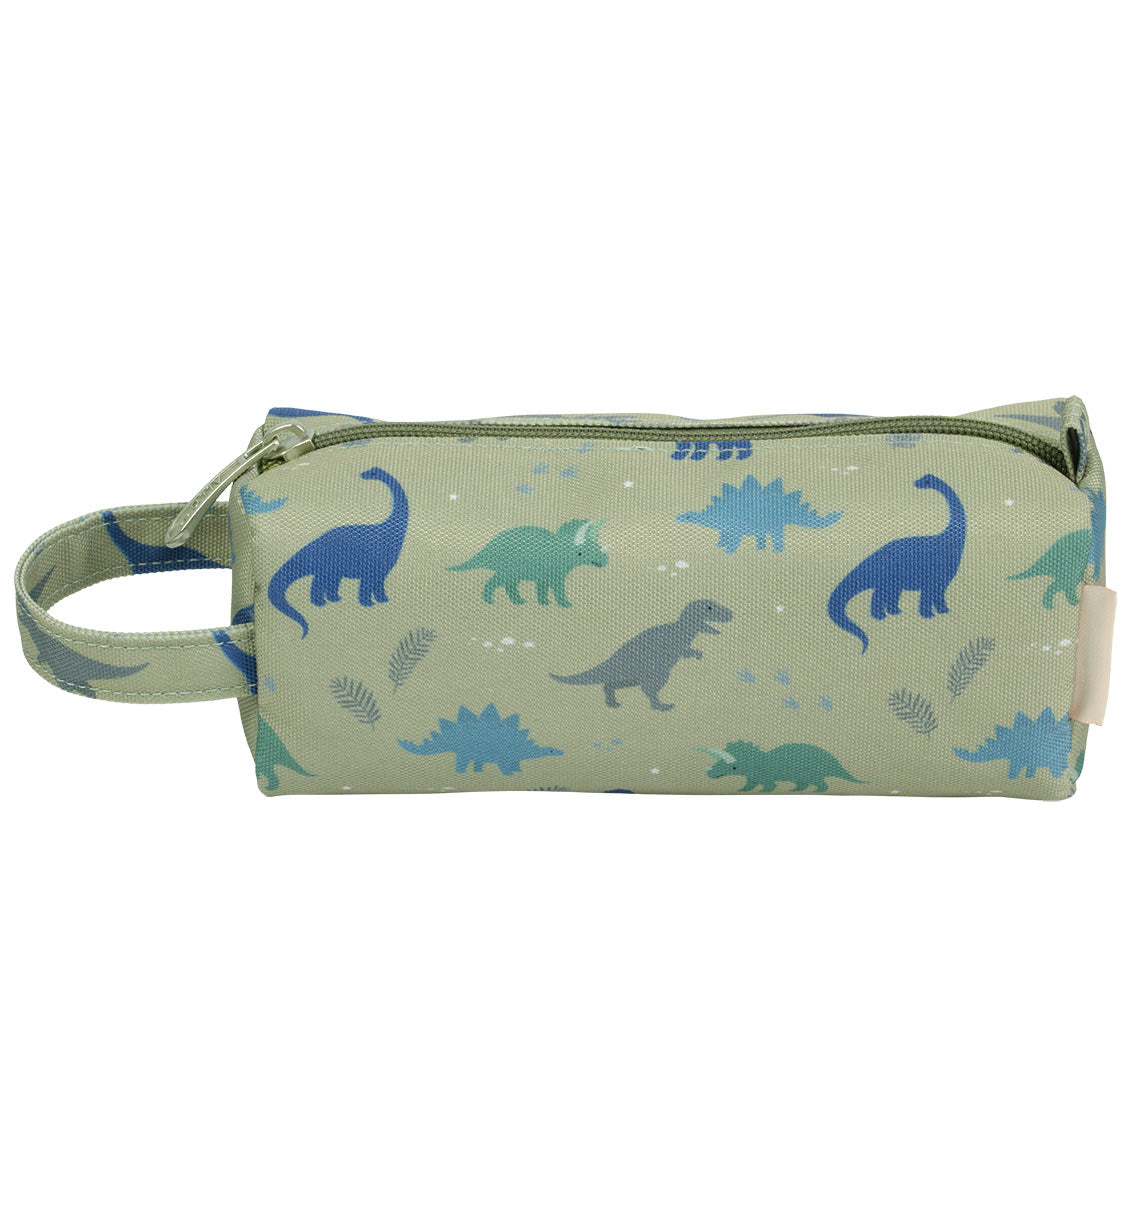 A LITTLE LOVELY COMPANY - Pencil case: Dinosaurs